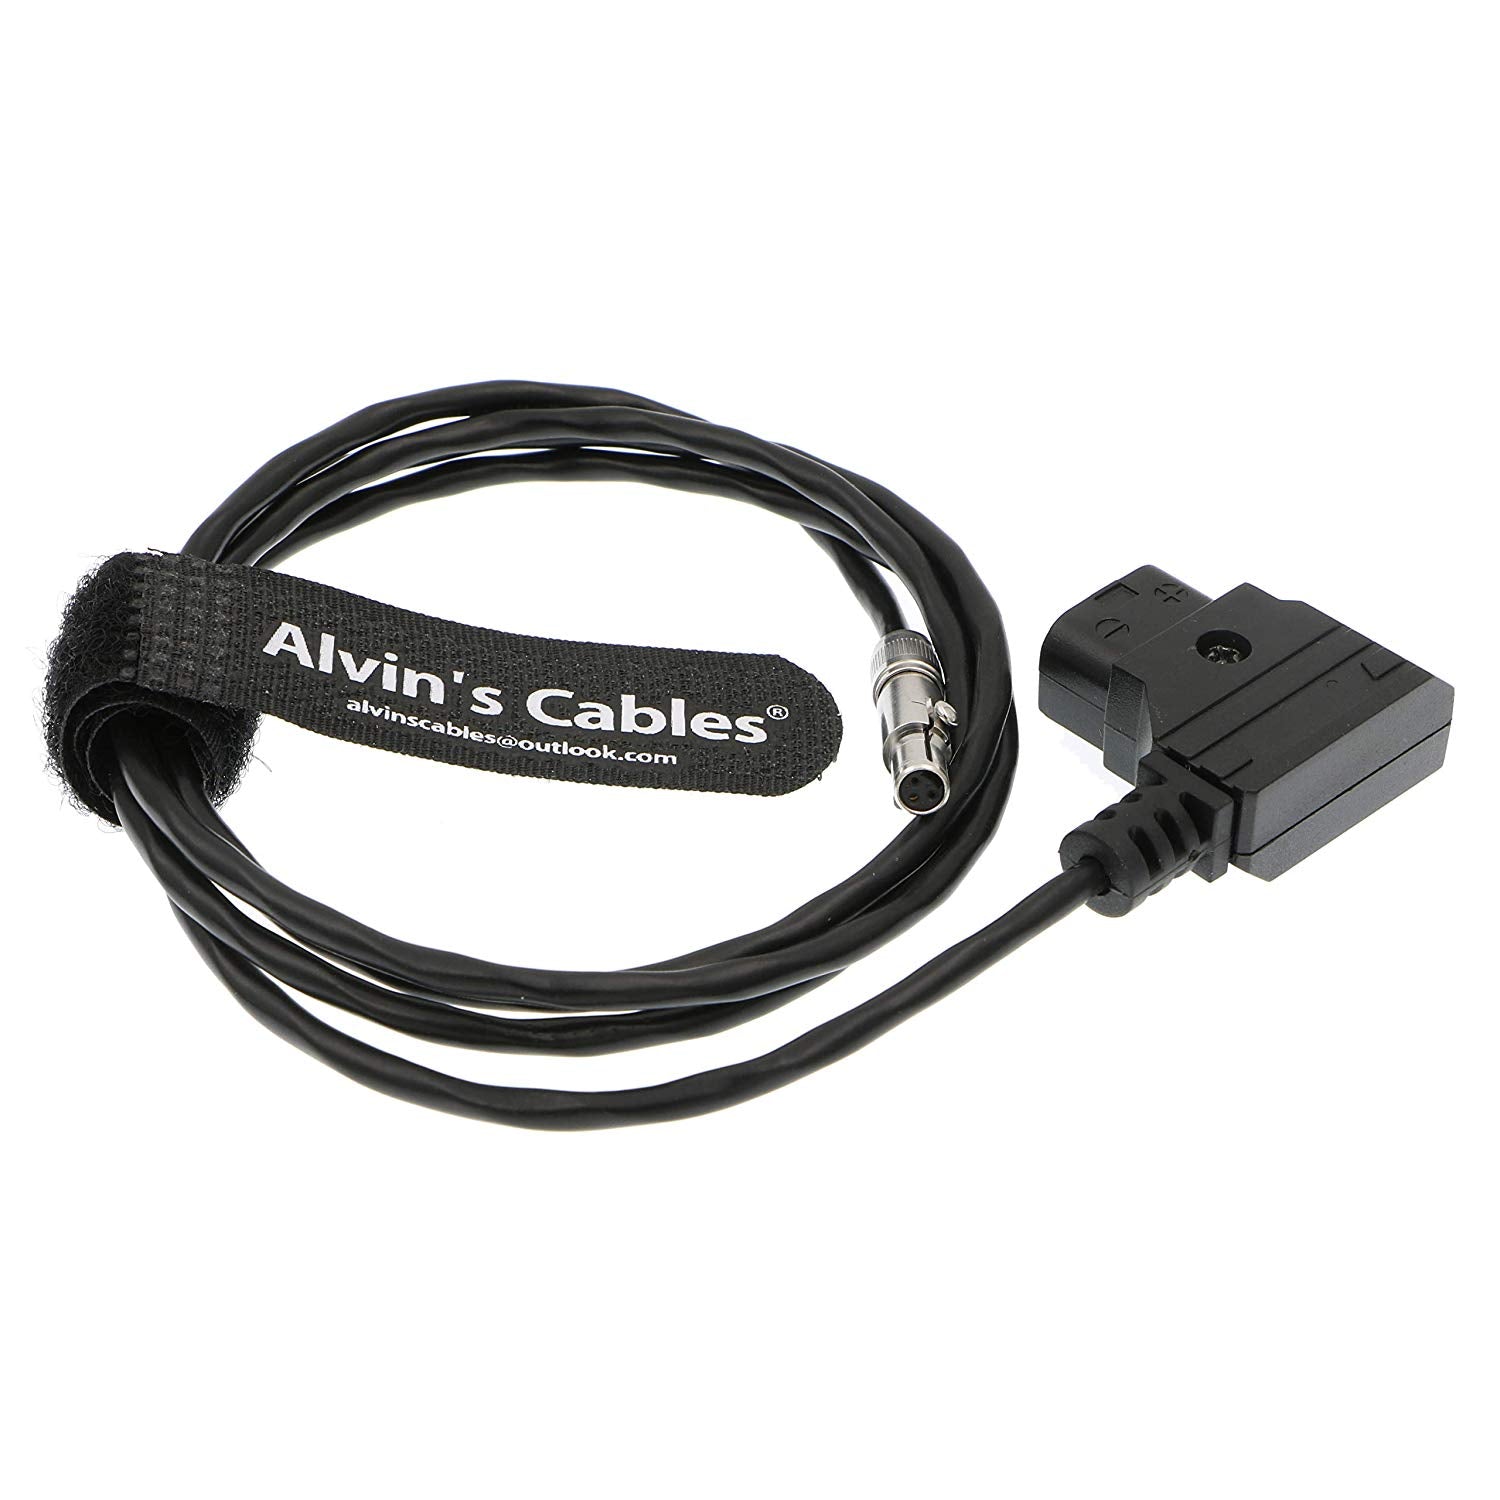 Alvin's Cables Odyssey 7Q Monitor Stromkabel 3 Pin Buchse auf D Tap Cord